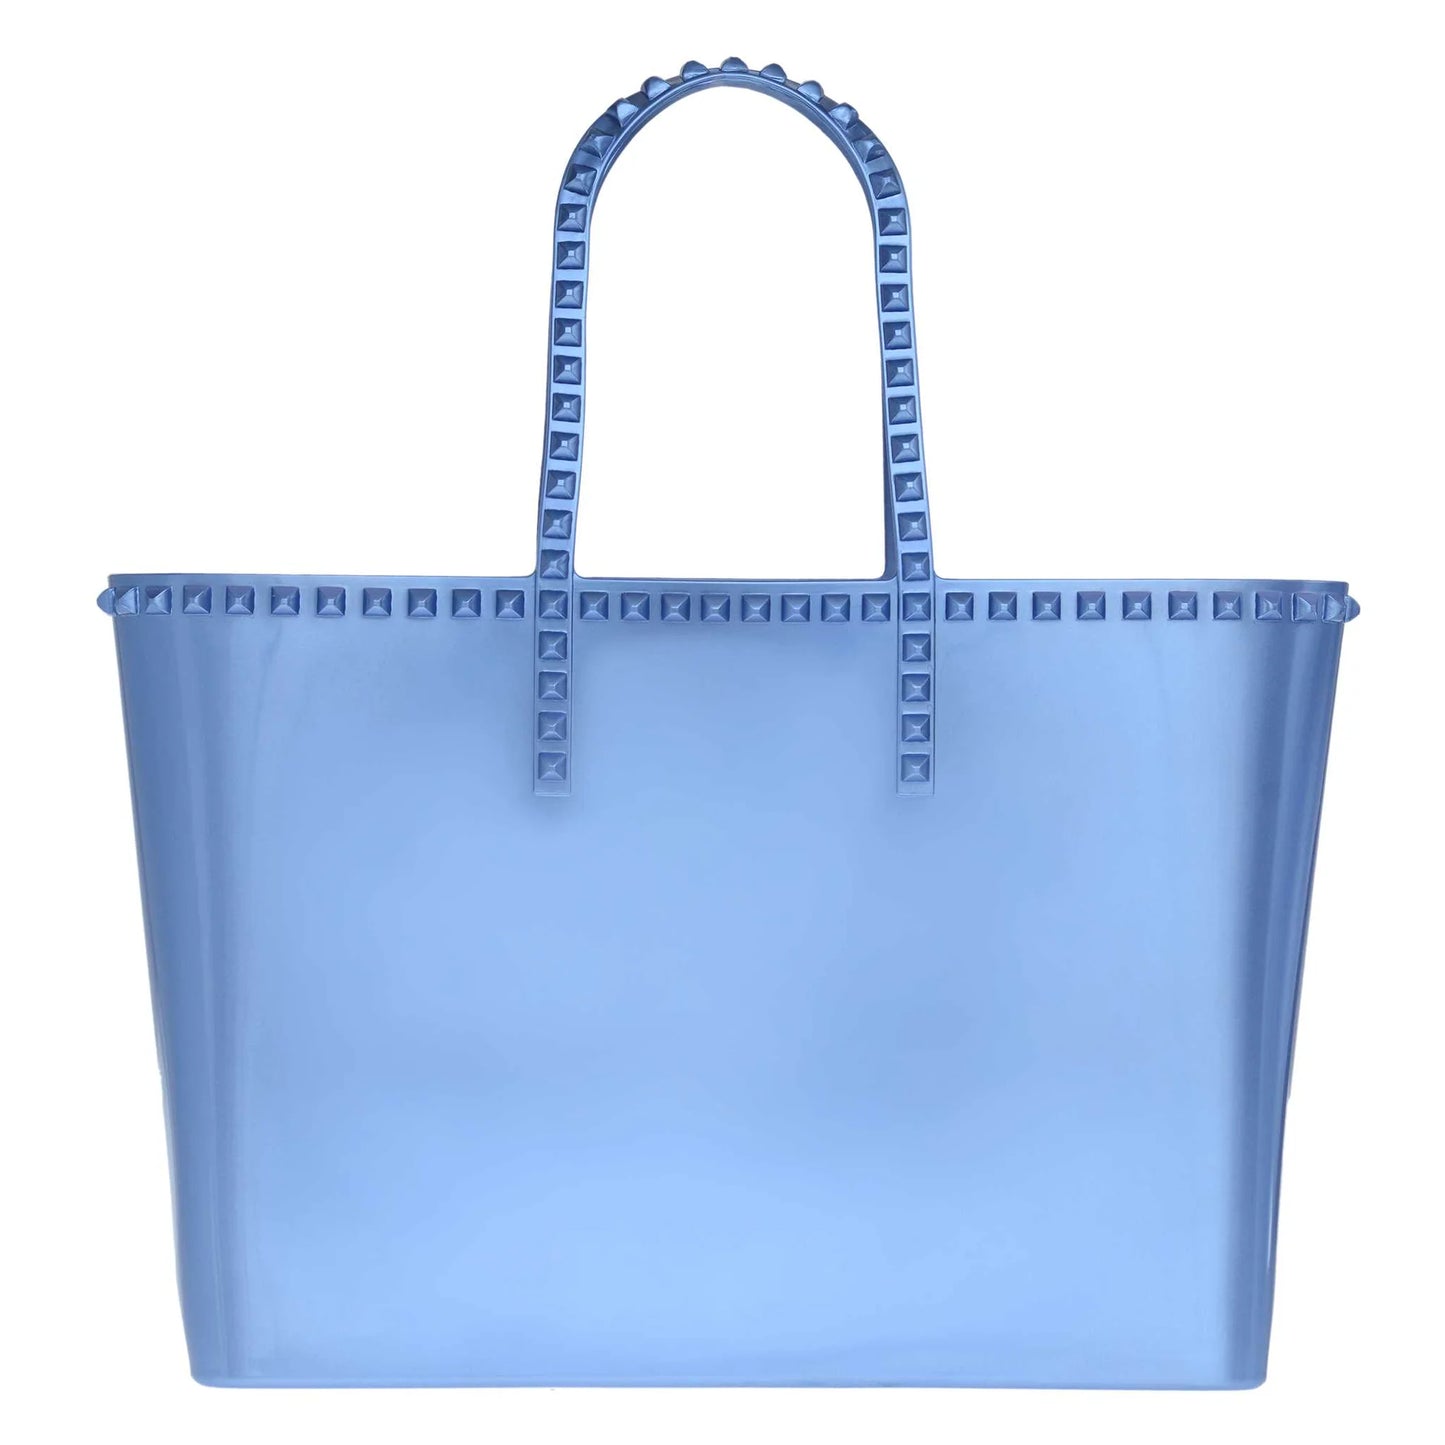 Angelica Large Tote in Metallic Baby Blue